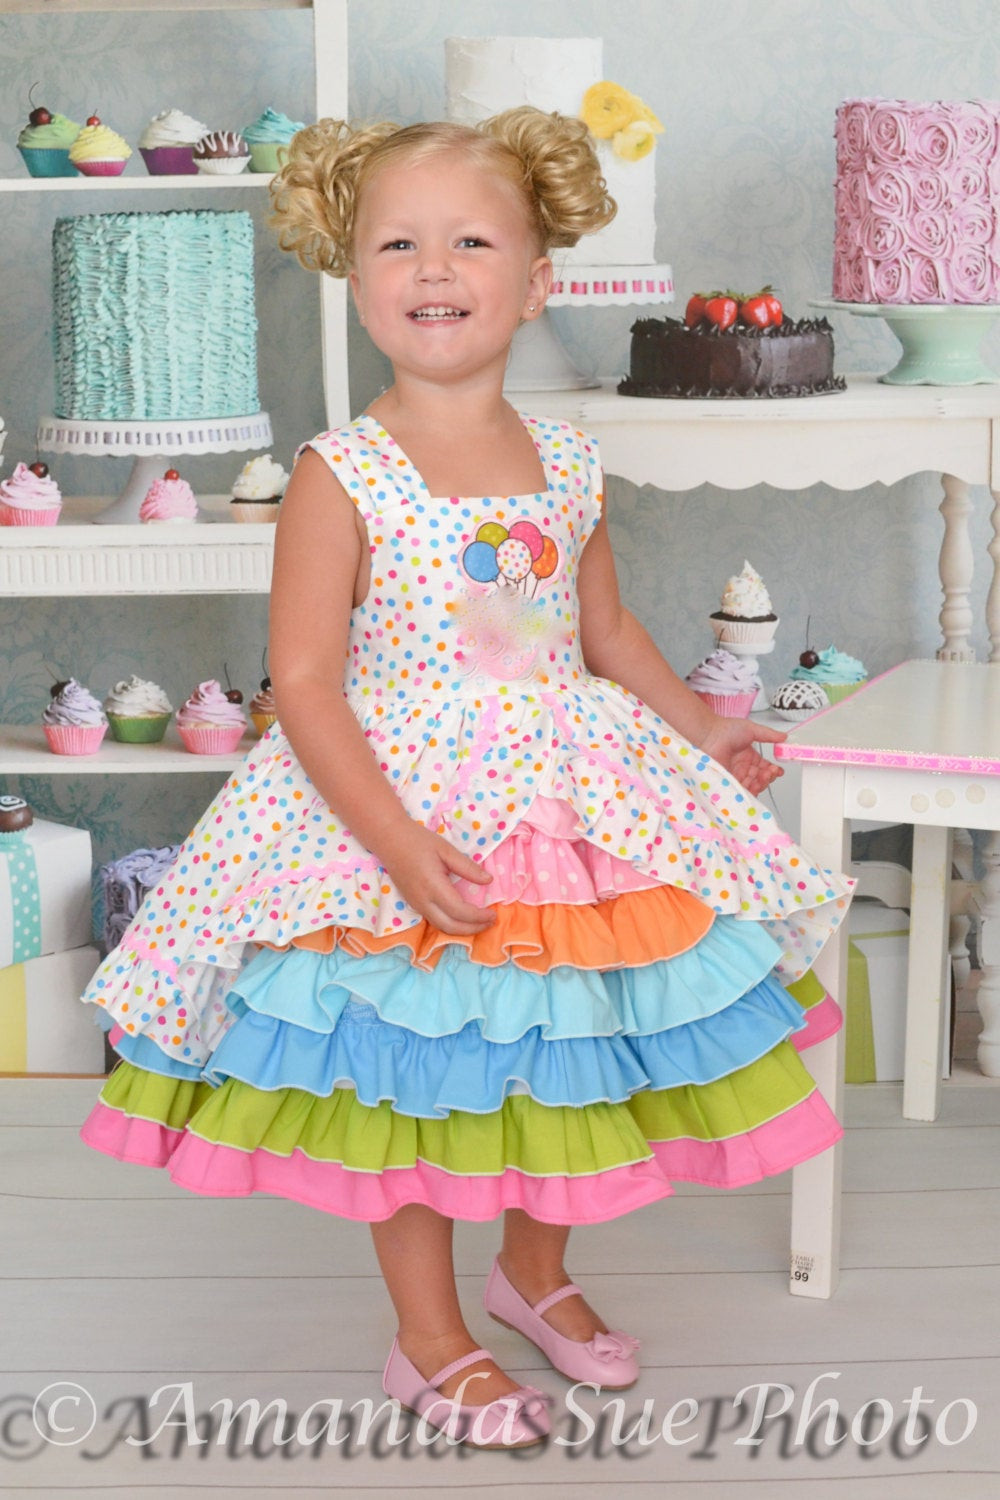 Baby Dress For Birthday Party
 size 3T birthday party confection dress baby toddler girls